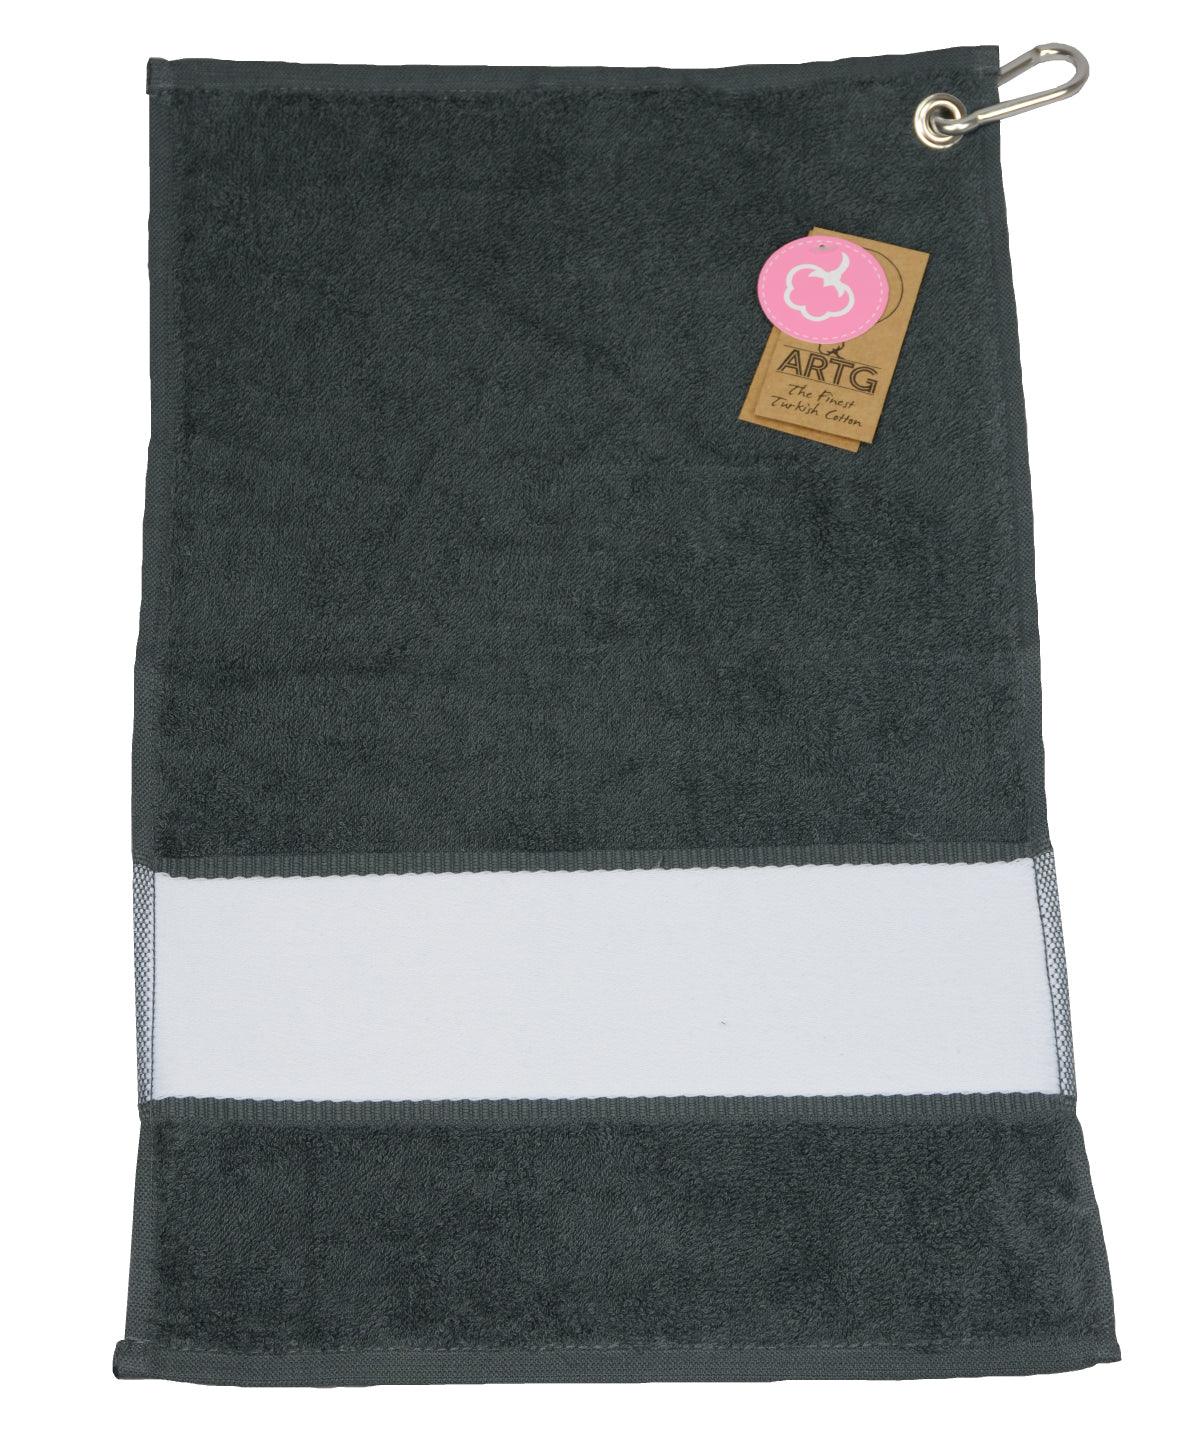 Graphite - ARTG® SUBLI-Me® golf towel Towels A&R Towels Homewares & Towelling, New For 2021, New Products – February Launch, New Styles For 2021, Rebrandable Schoolwear Centres